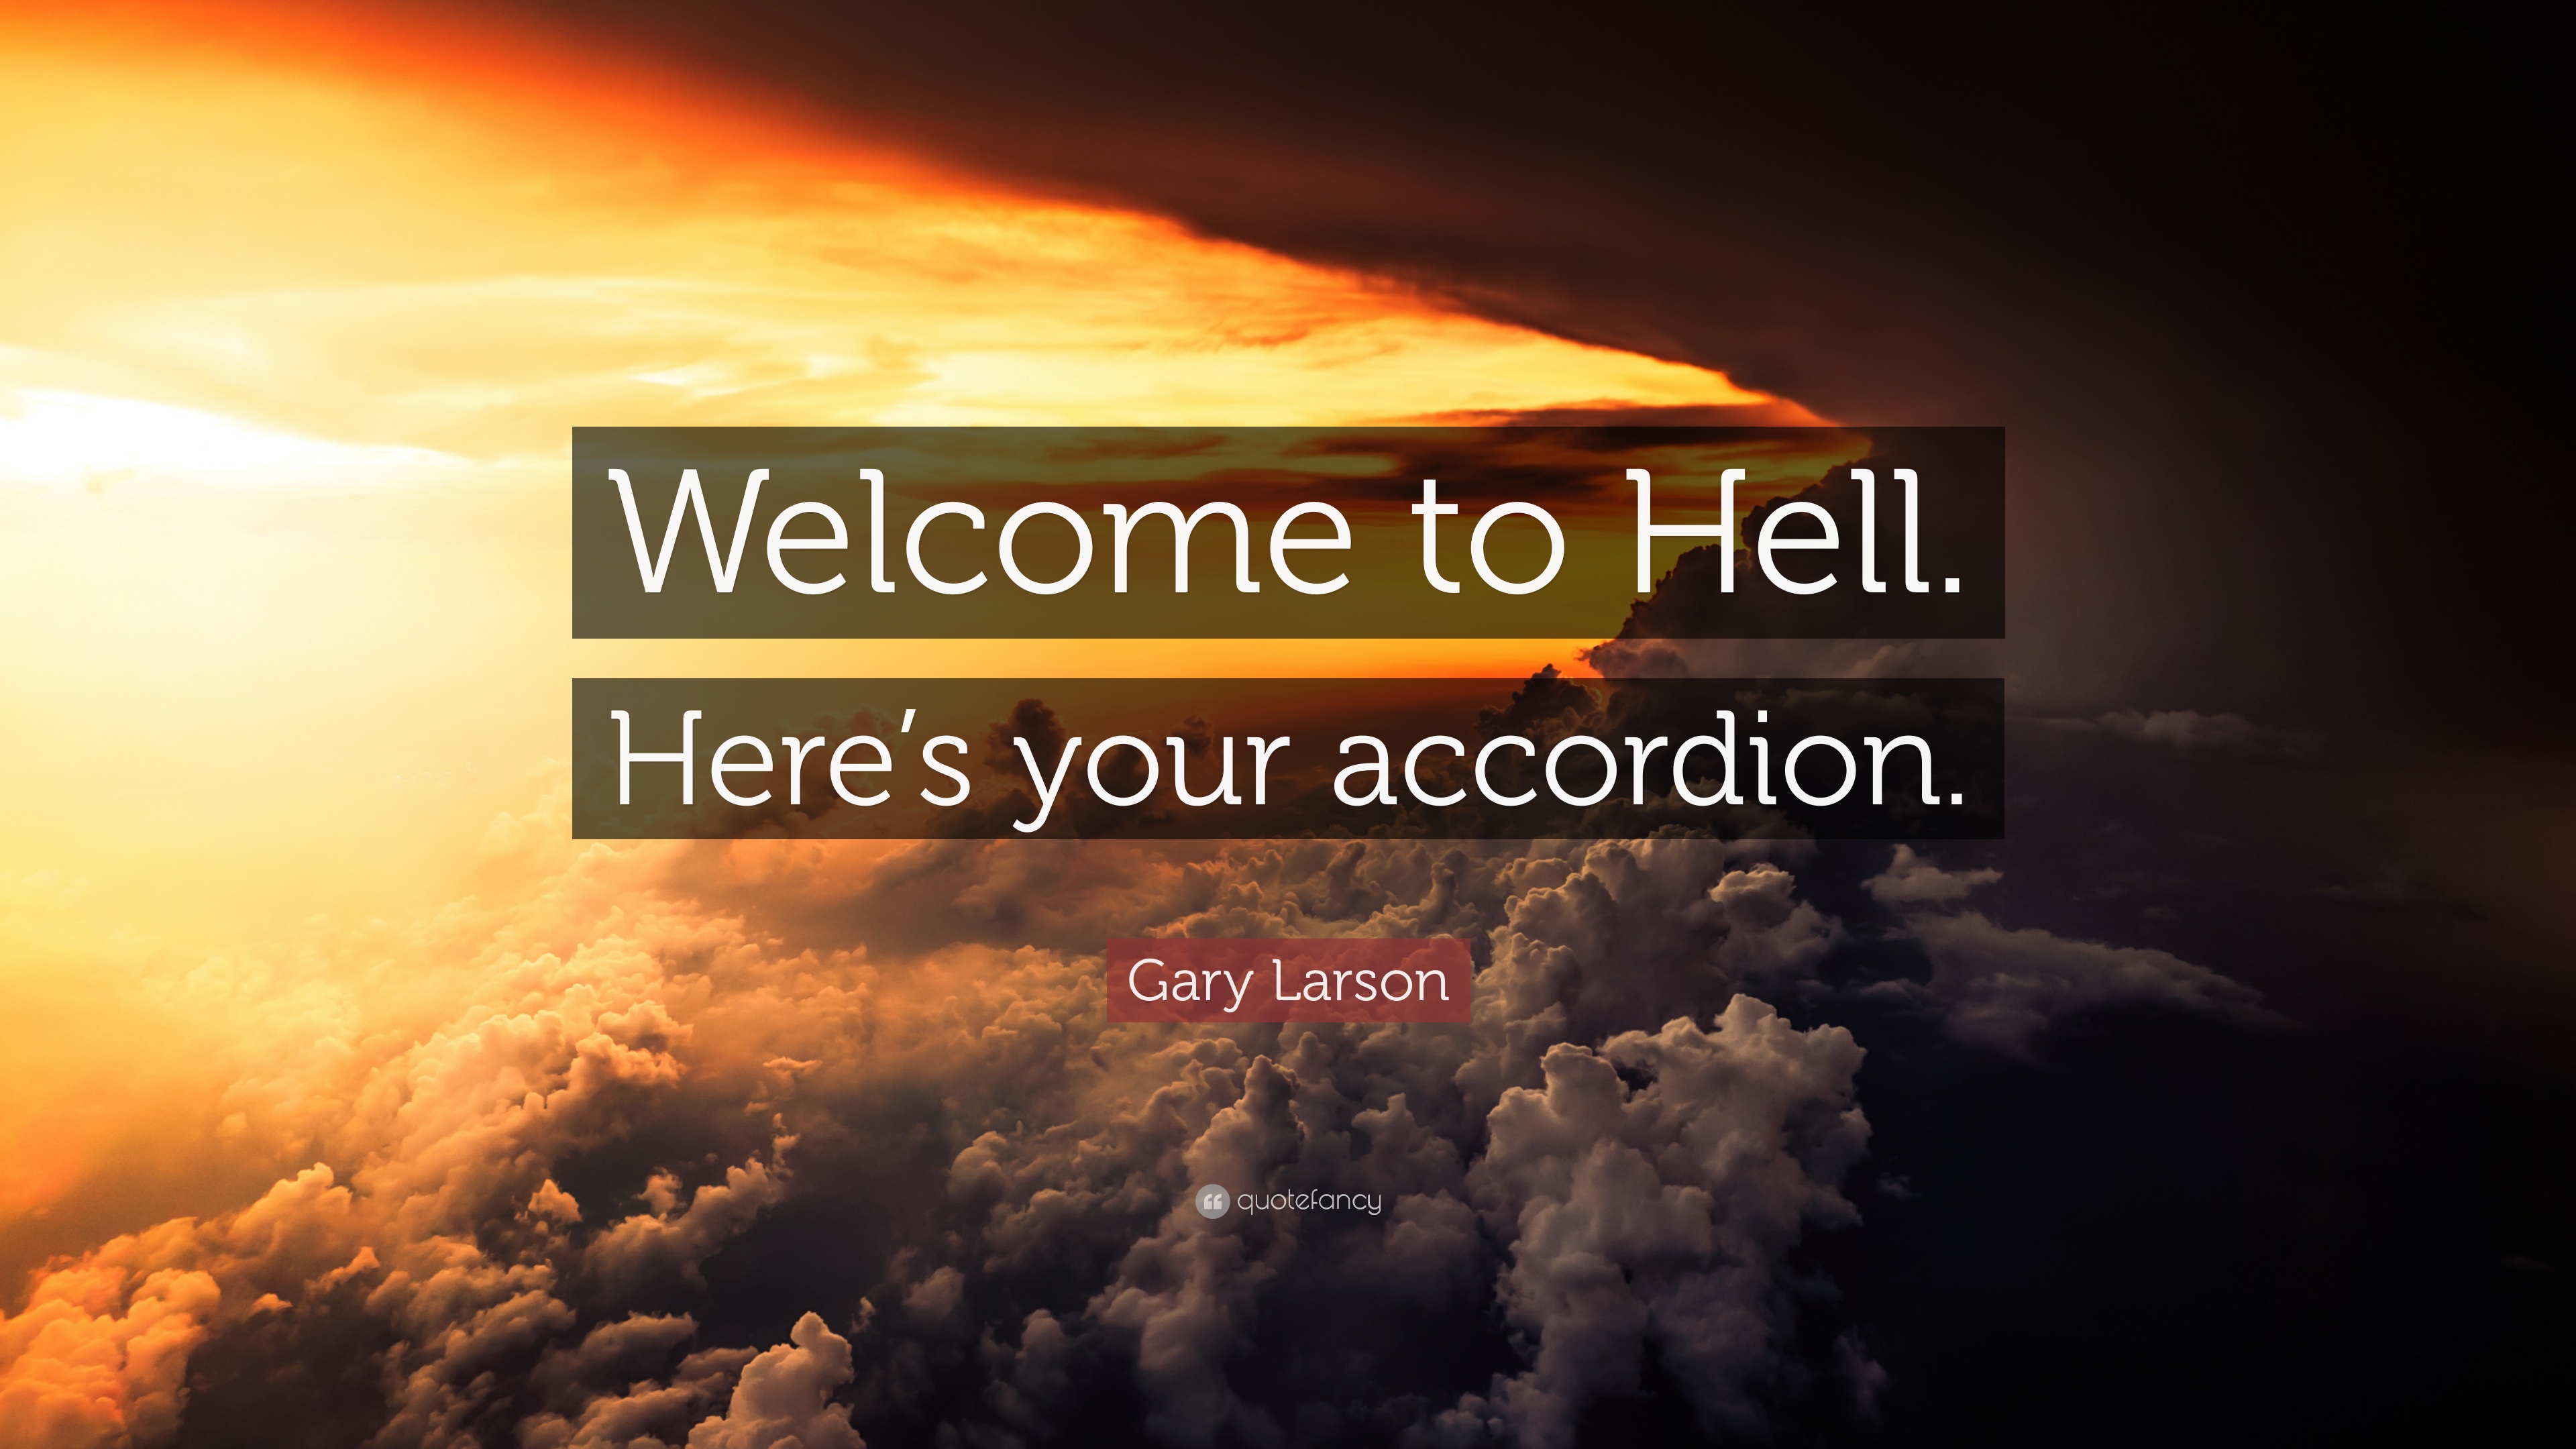 Gary Larson Quote: “Welcome to Hell. Here's your accordion.” 12